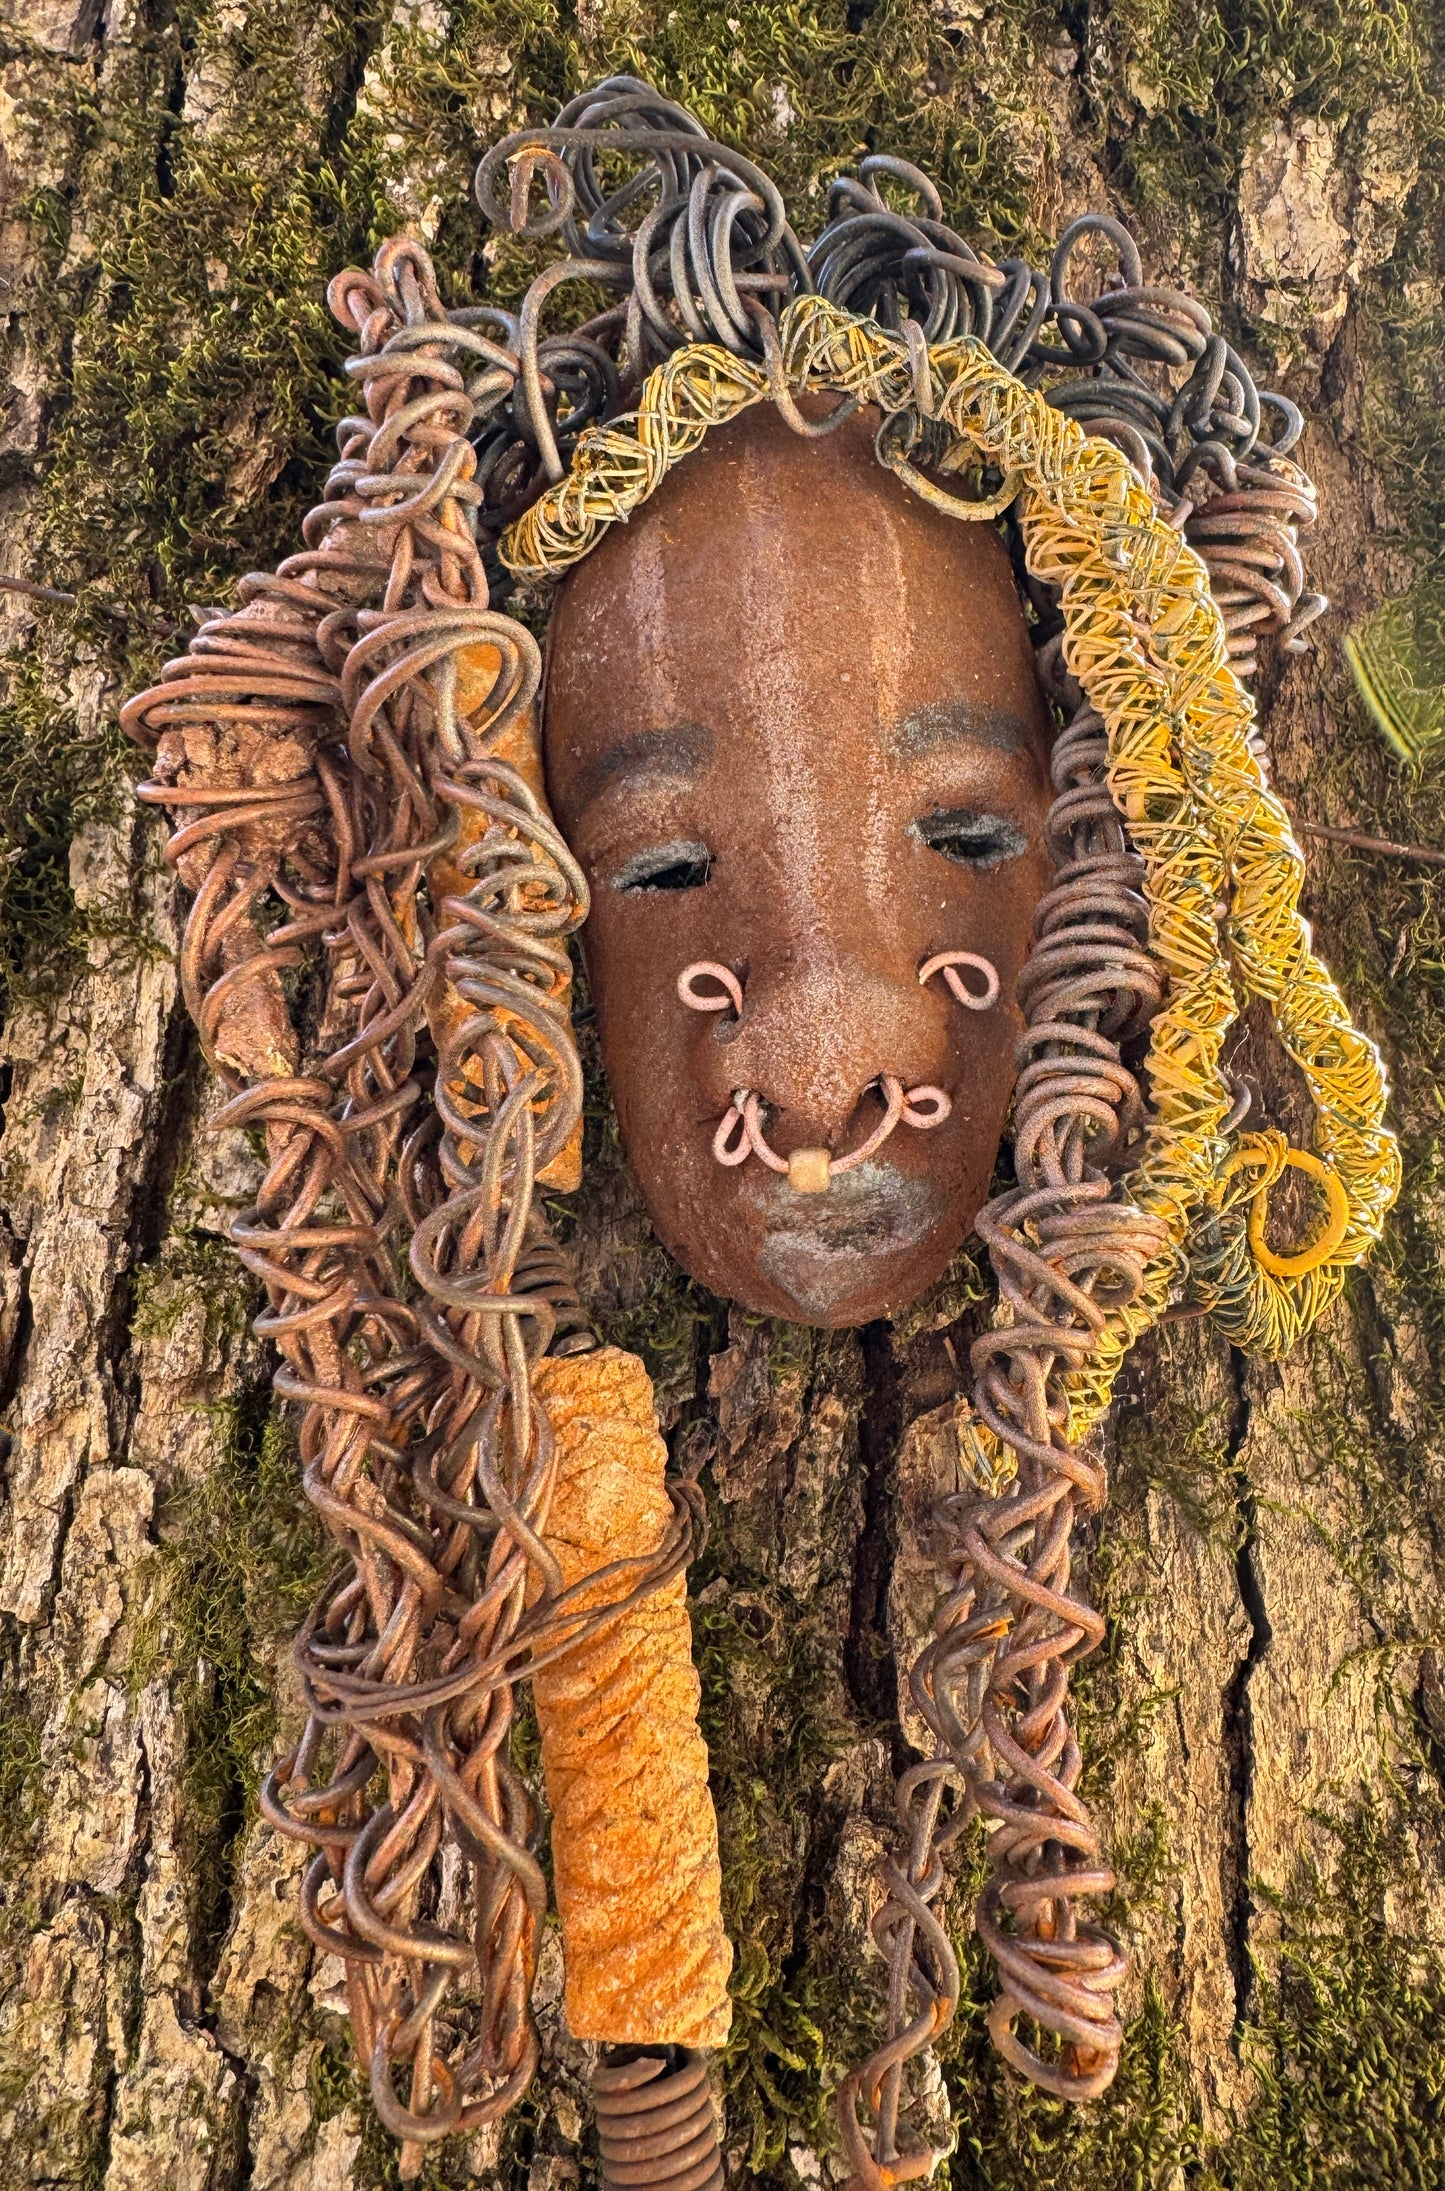 At 5" x 8" in size, Ike makes a stunning addition to walls, trees, and shadow boxes. His signature brown and amber braided hair is ornamented with handcrafted Raku beads, while his skin has a warm honey brown hue. Each piece is equipped with over 20 feet of top-notch 16 & 24-gauge wire in the hair. This fashionable sculpture will bring a modern flair to any room - simply place it in a shadow box and enjoy!